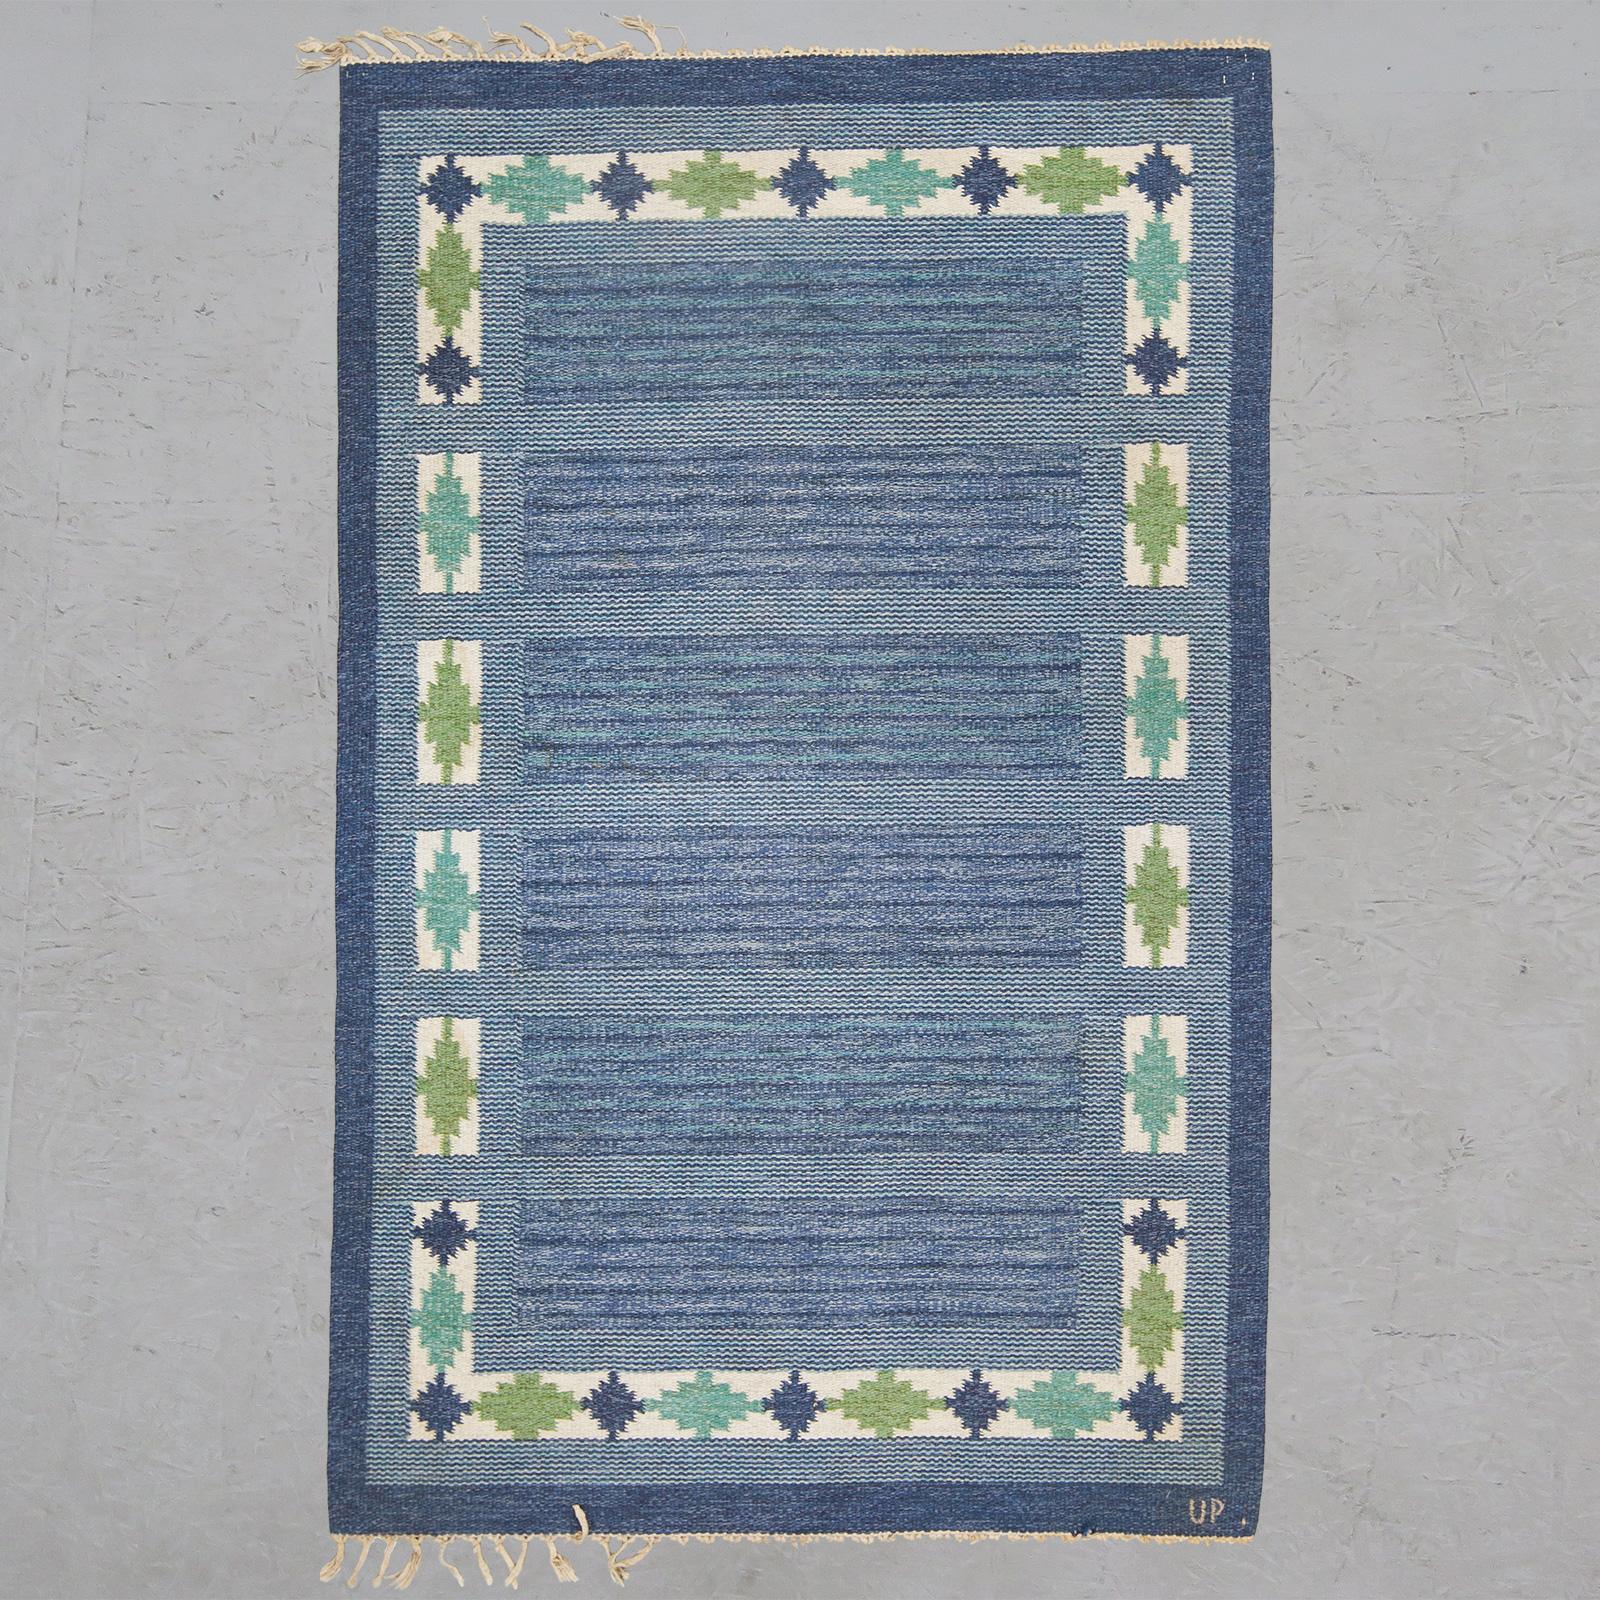 Wonderful Swedish flat-weave rug in various shades of blue and green with geometric border compositions. Signed UP.